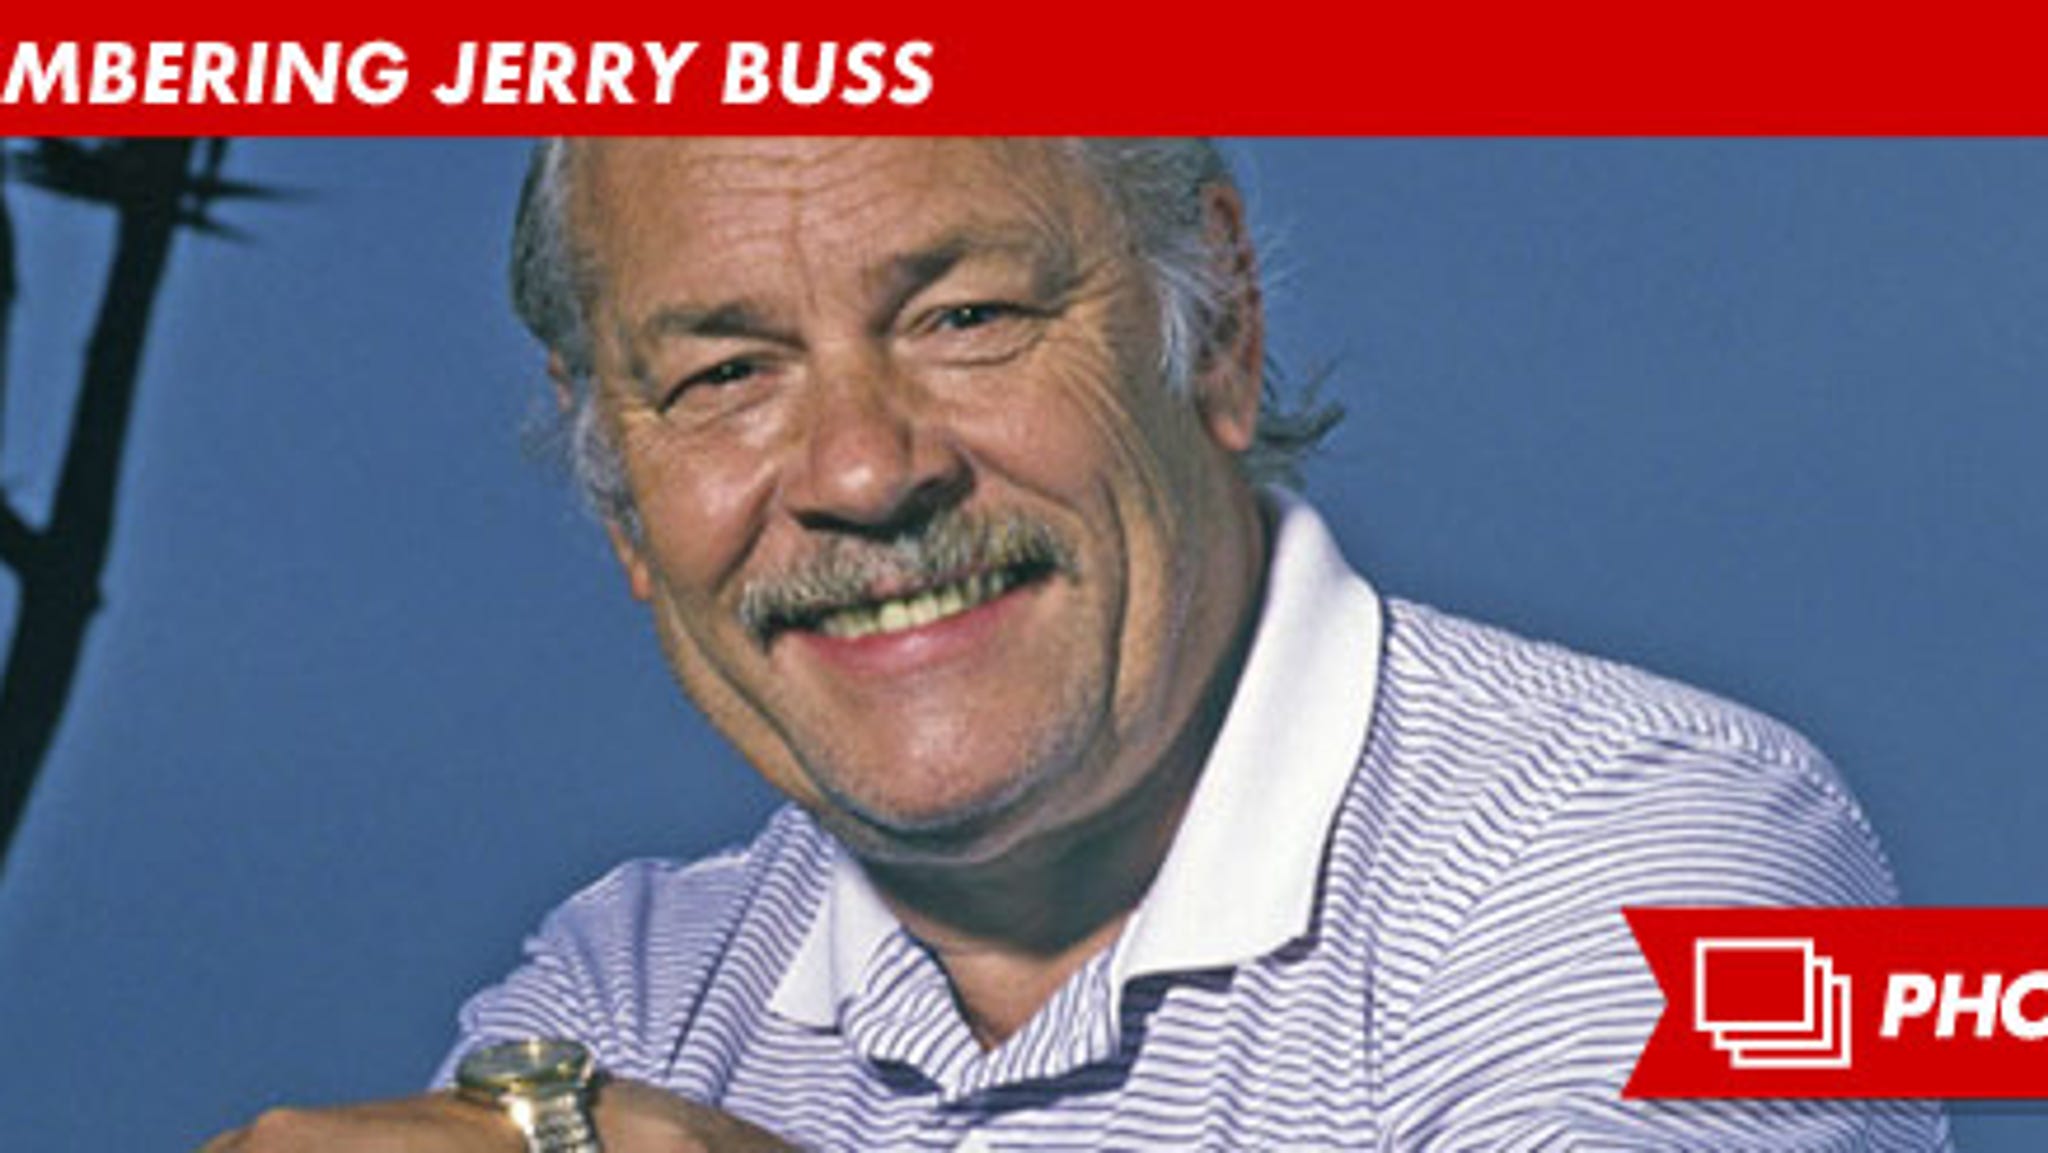 Lakers owner Jerry Buss passes away at age 80 - NBC Sports